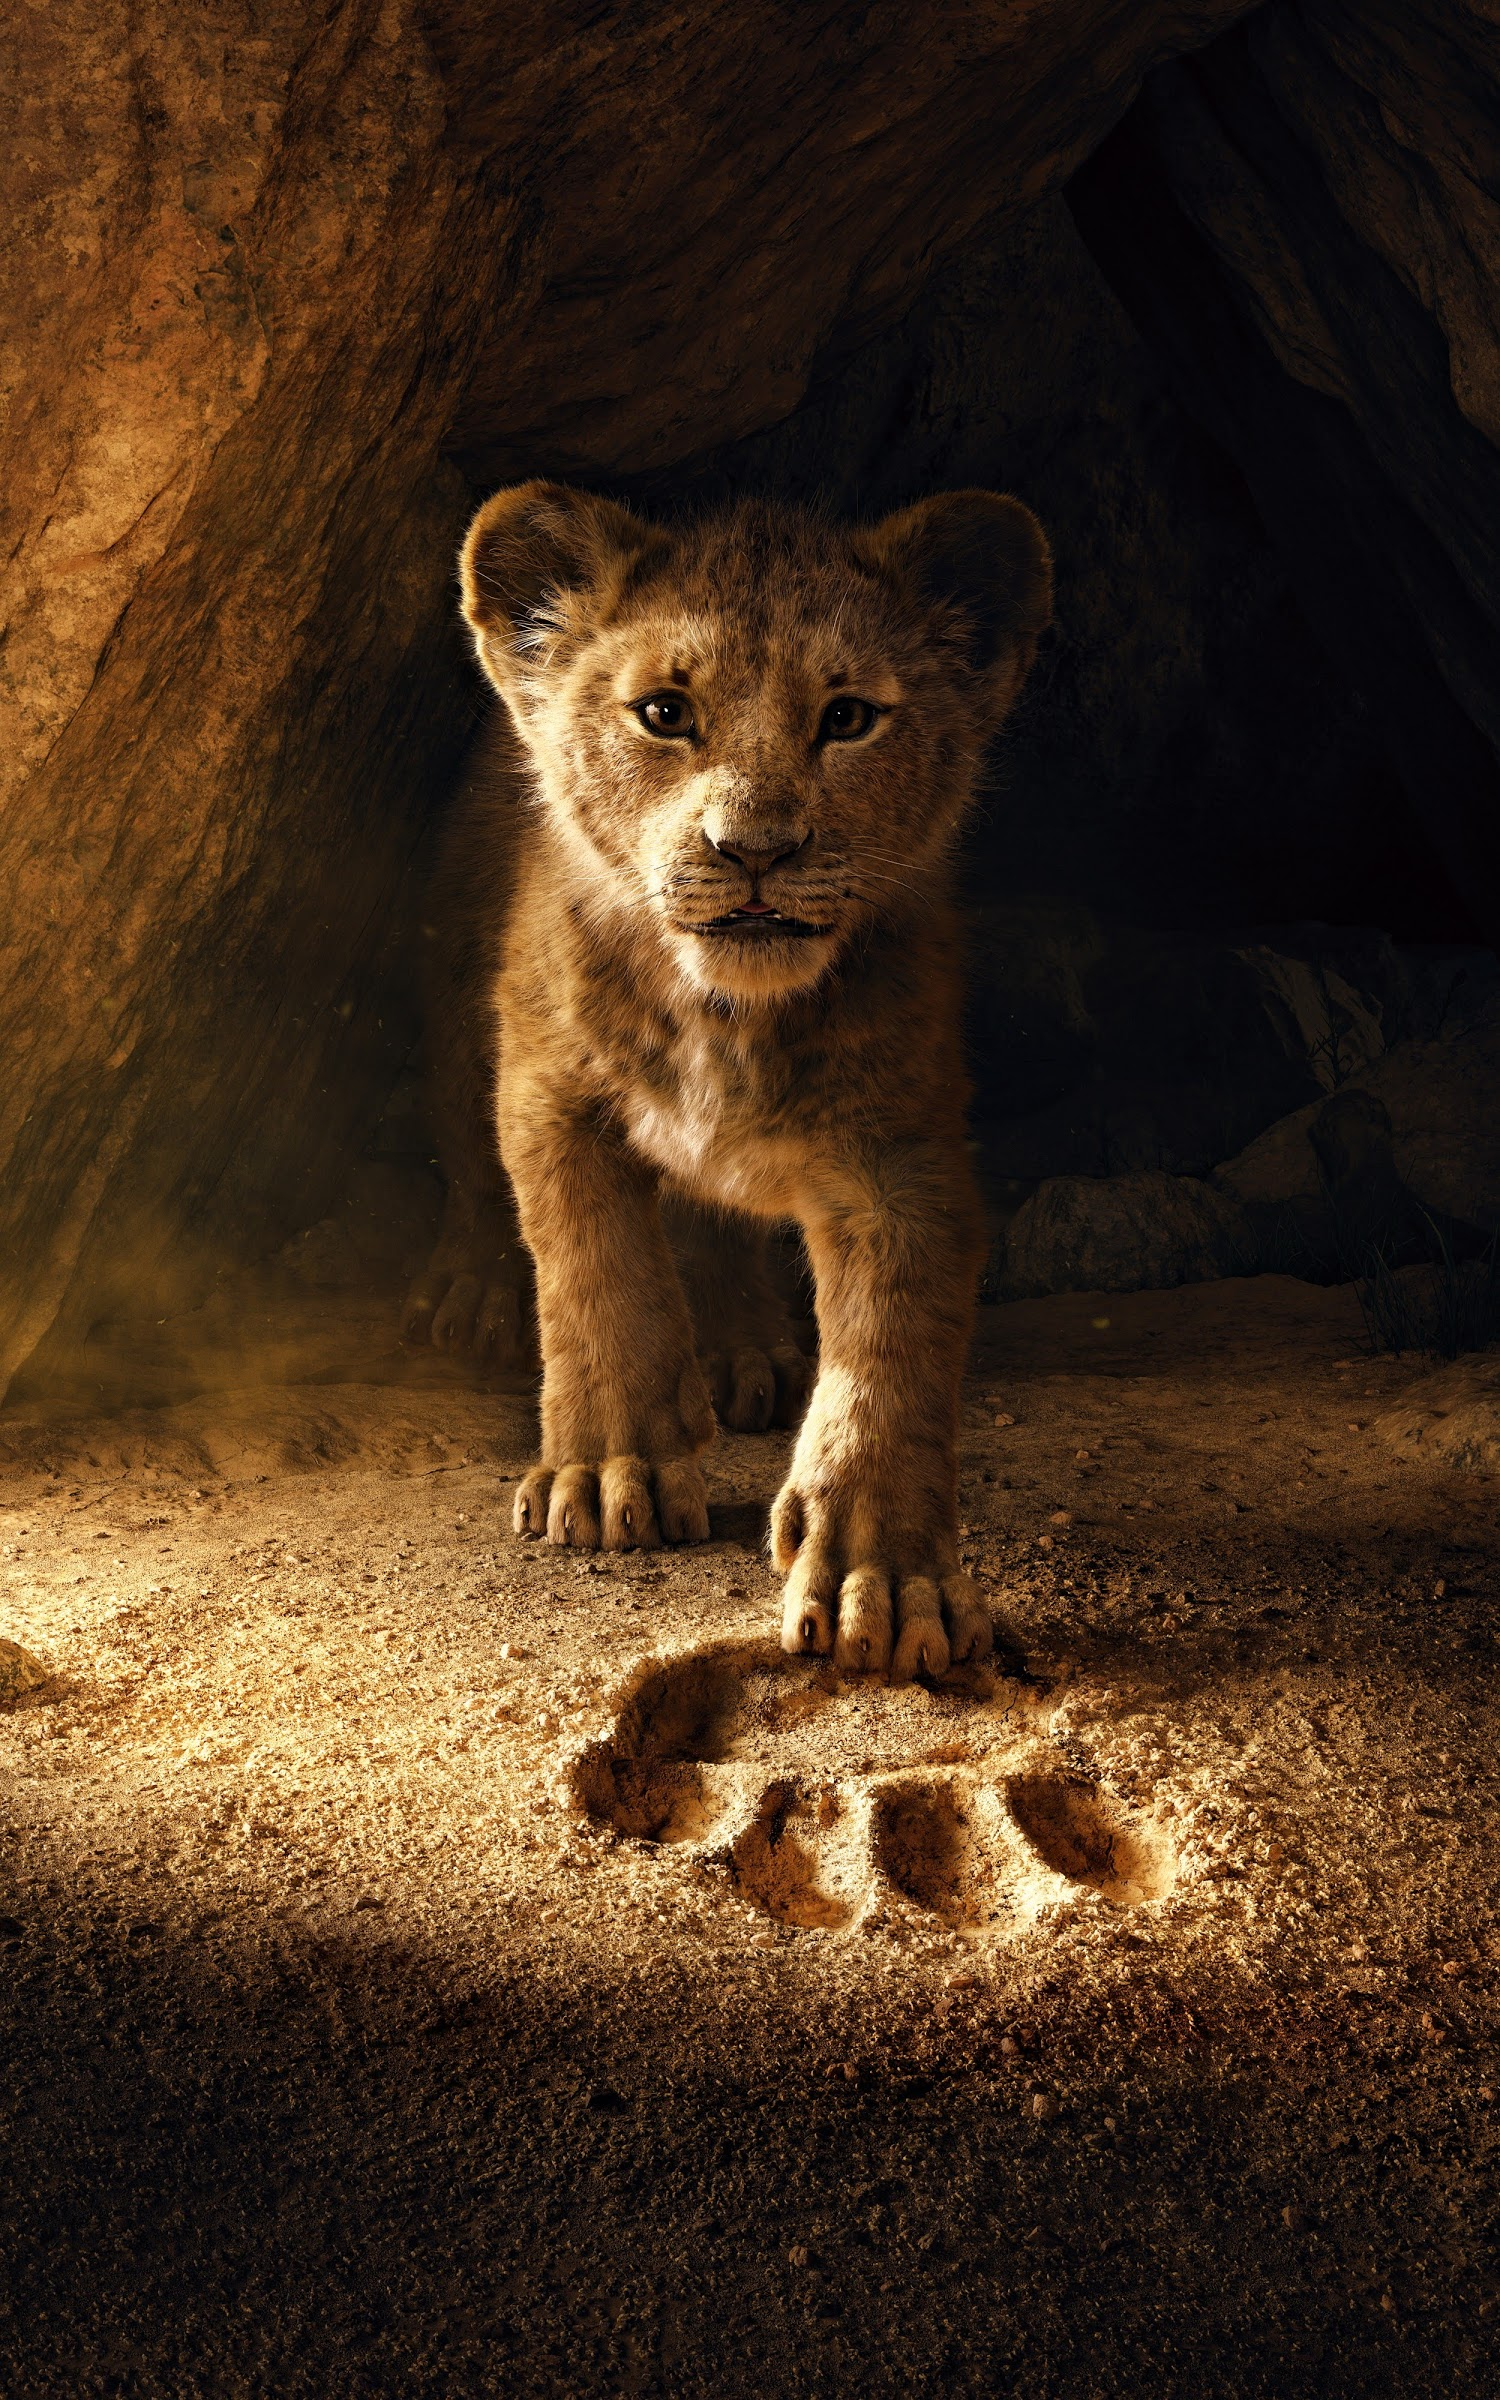 The Lion King (2019) wallpaper. Movies Category. Laginate. Lion king picture, Lion wallpaper, Lion king movie